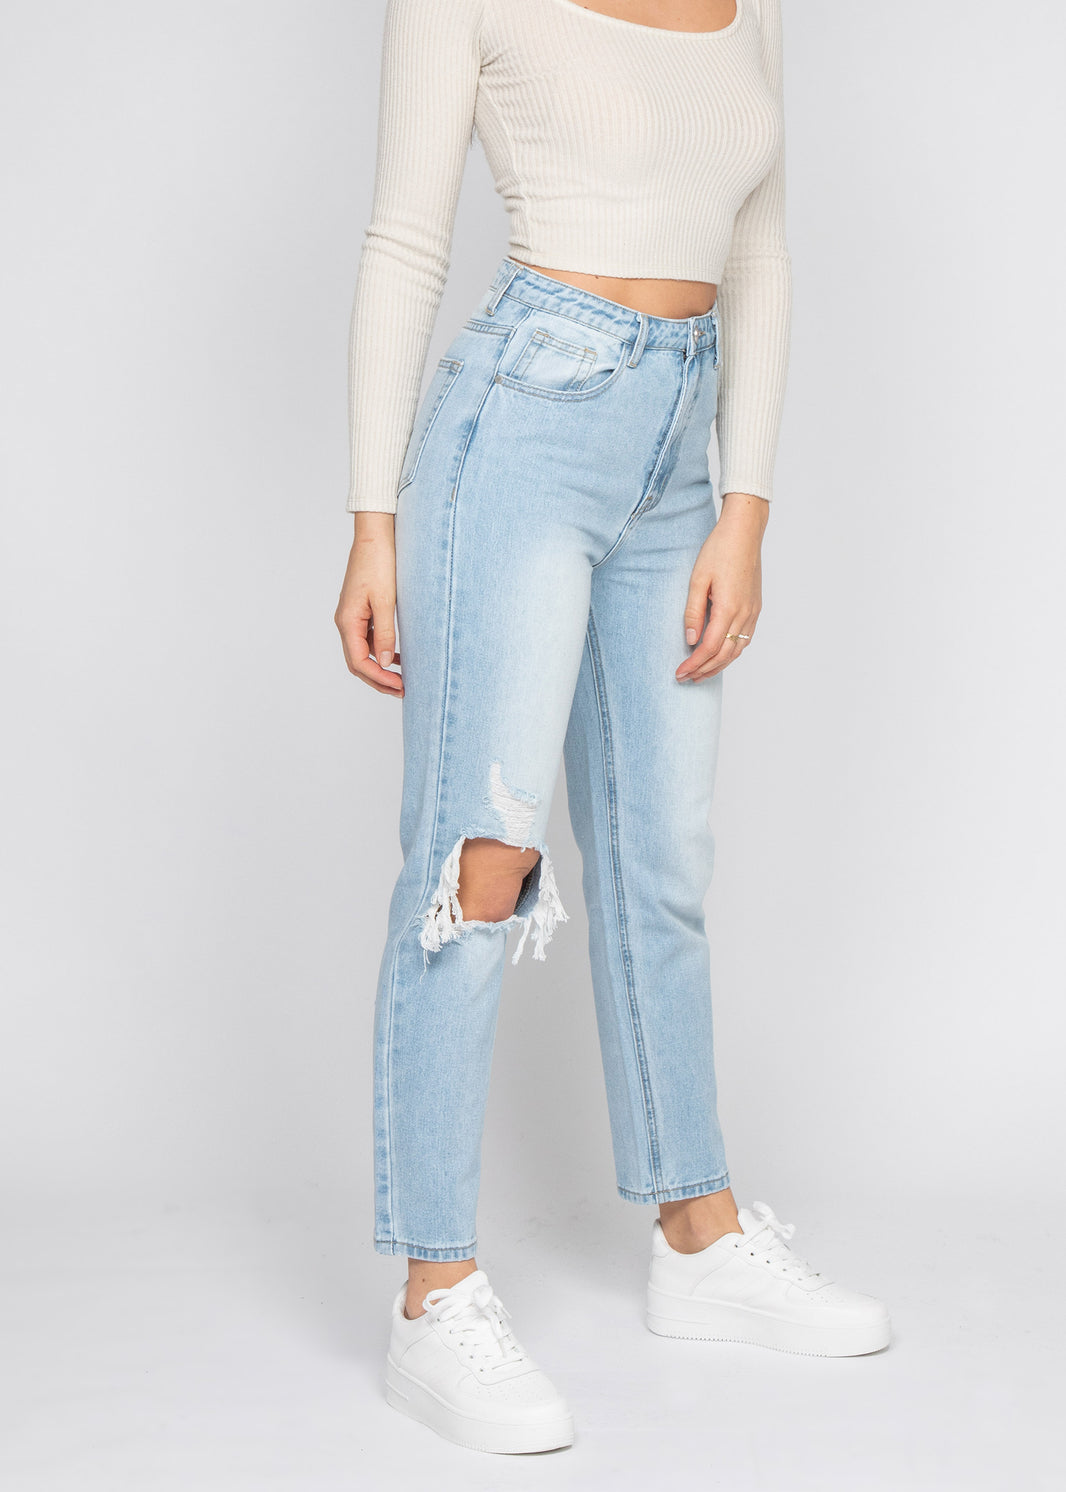 Ripped mom jeans in light blue